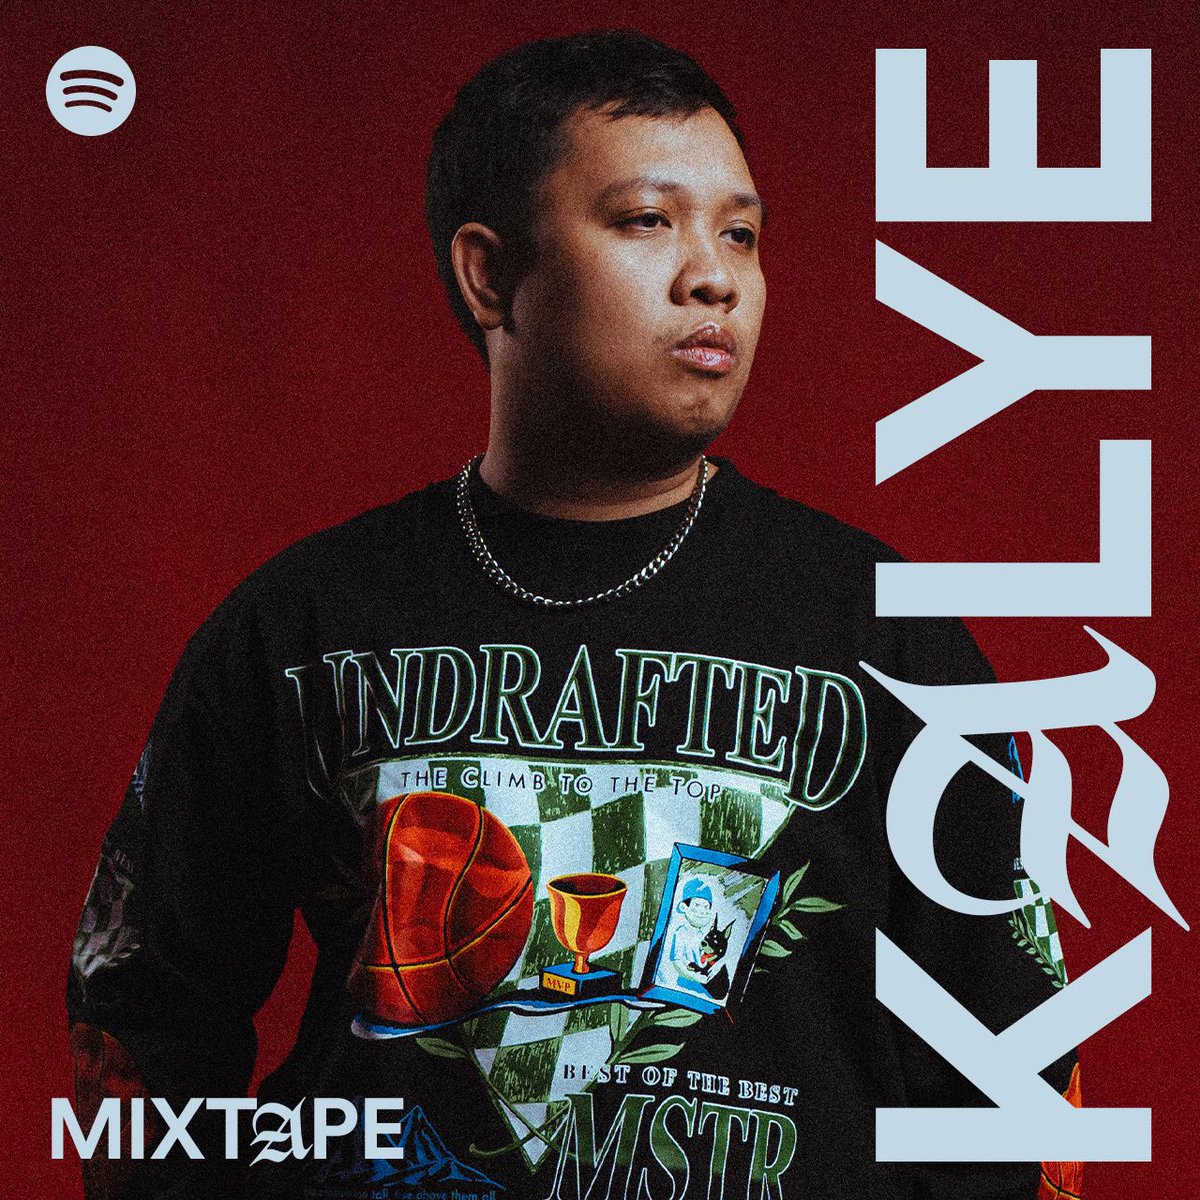 🚨 The genius producer behind few Pinoy hip-hop bangers from Illest Morena to Hev Abi is here! NJ takes over the Spotify’s KALYE Mixtape Playlist 😎 Stream and get to know more of his solid taste at open.spotify.com/playlist/37i9d…